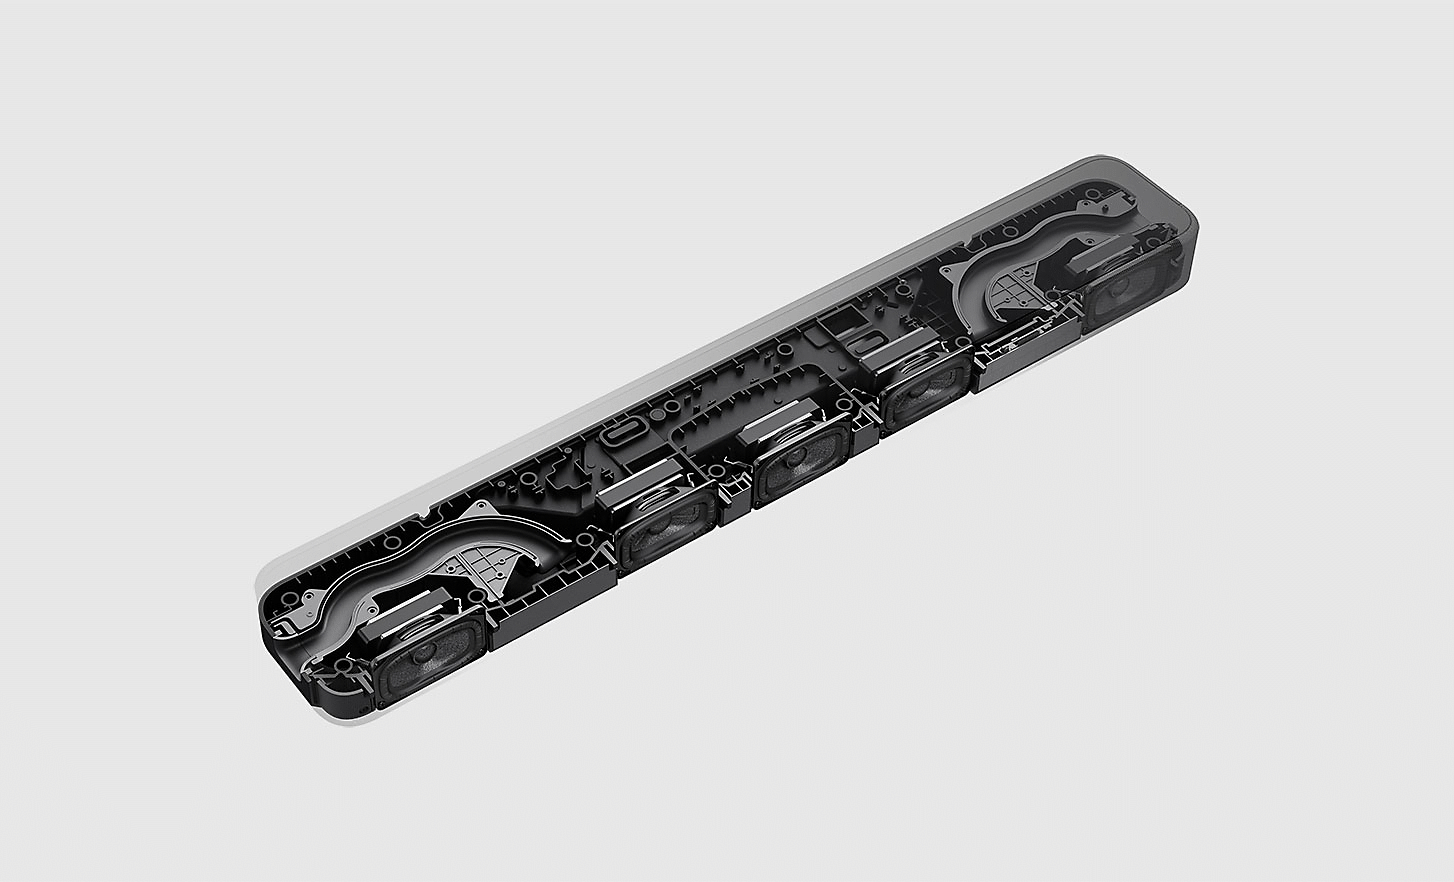 Image of the internal components of the HT-S2000 soundbar